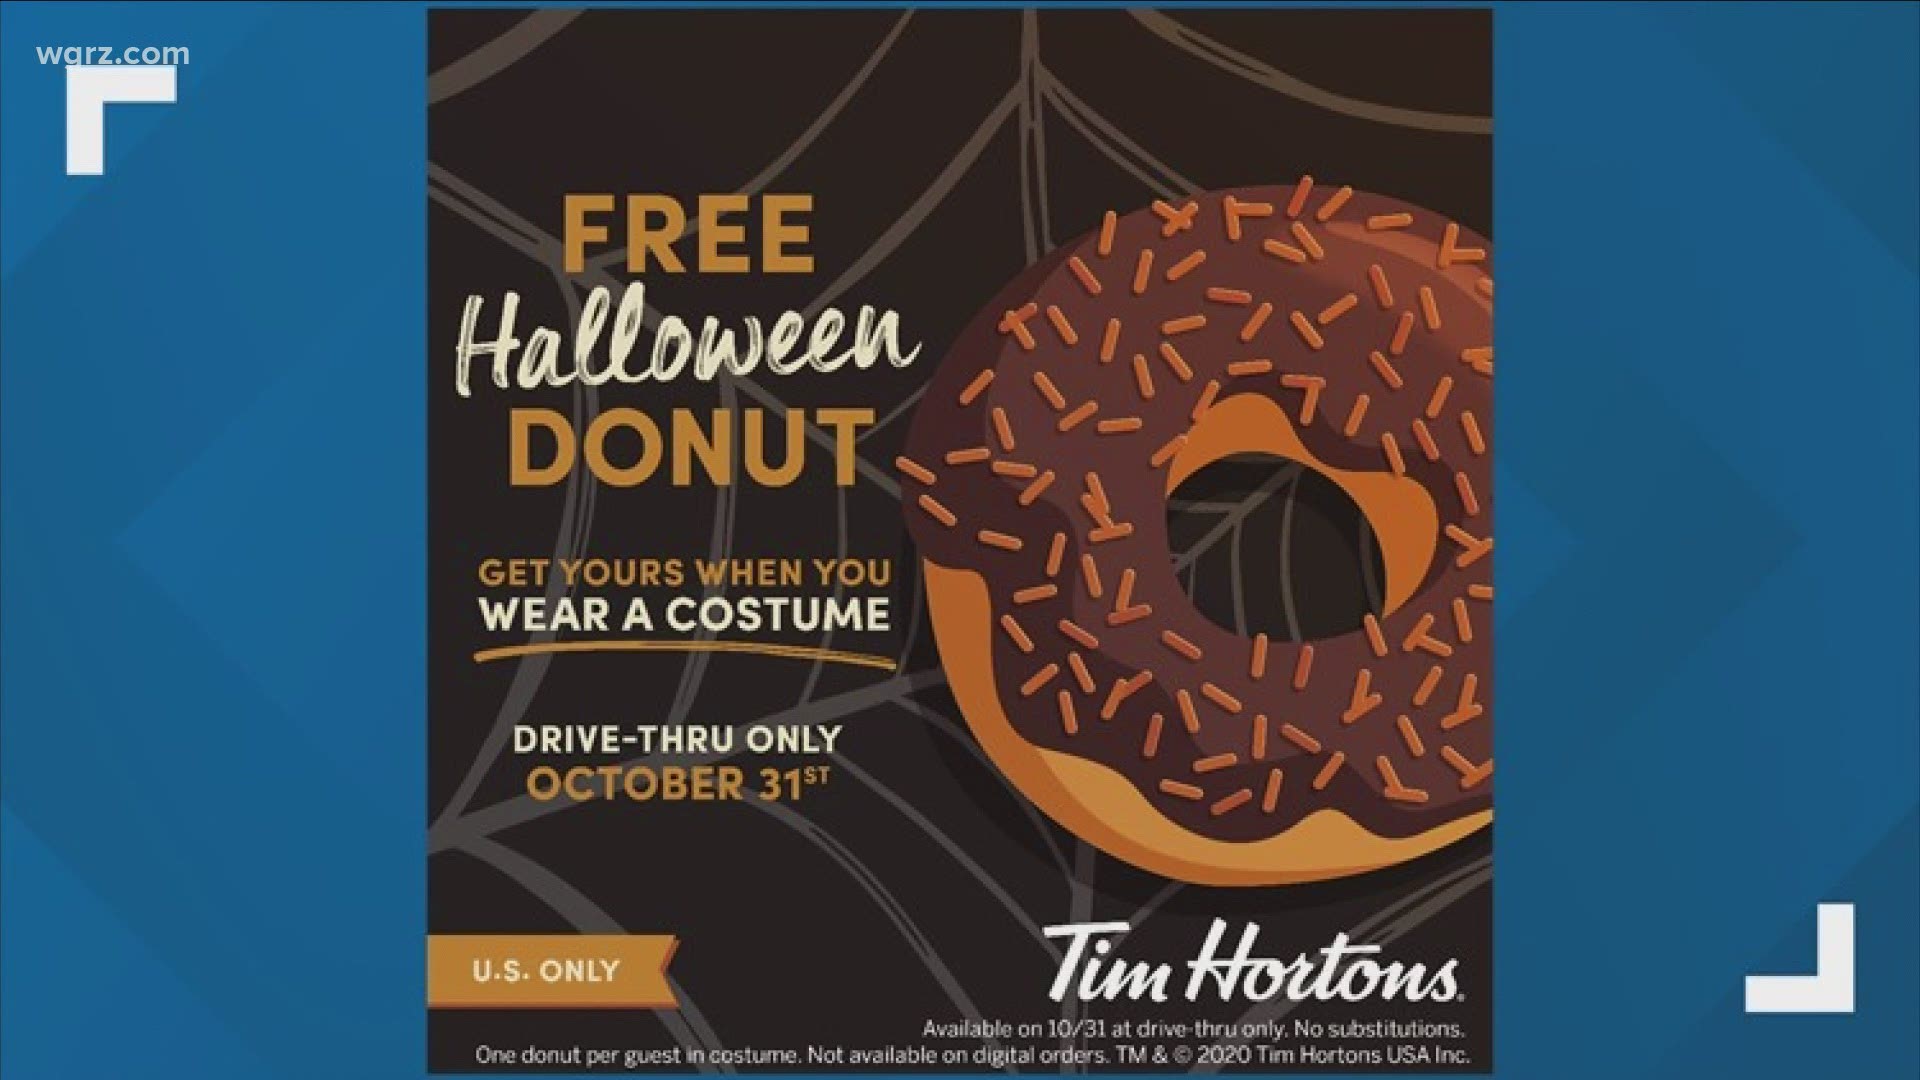 Tim Hortons giving away free donuts if you wear a costume on Halloween to the drive thru